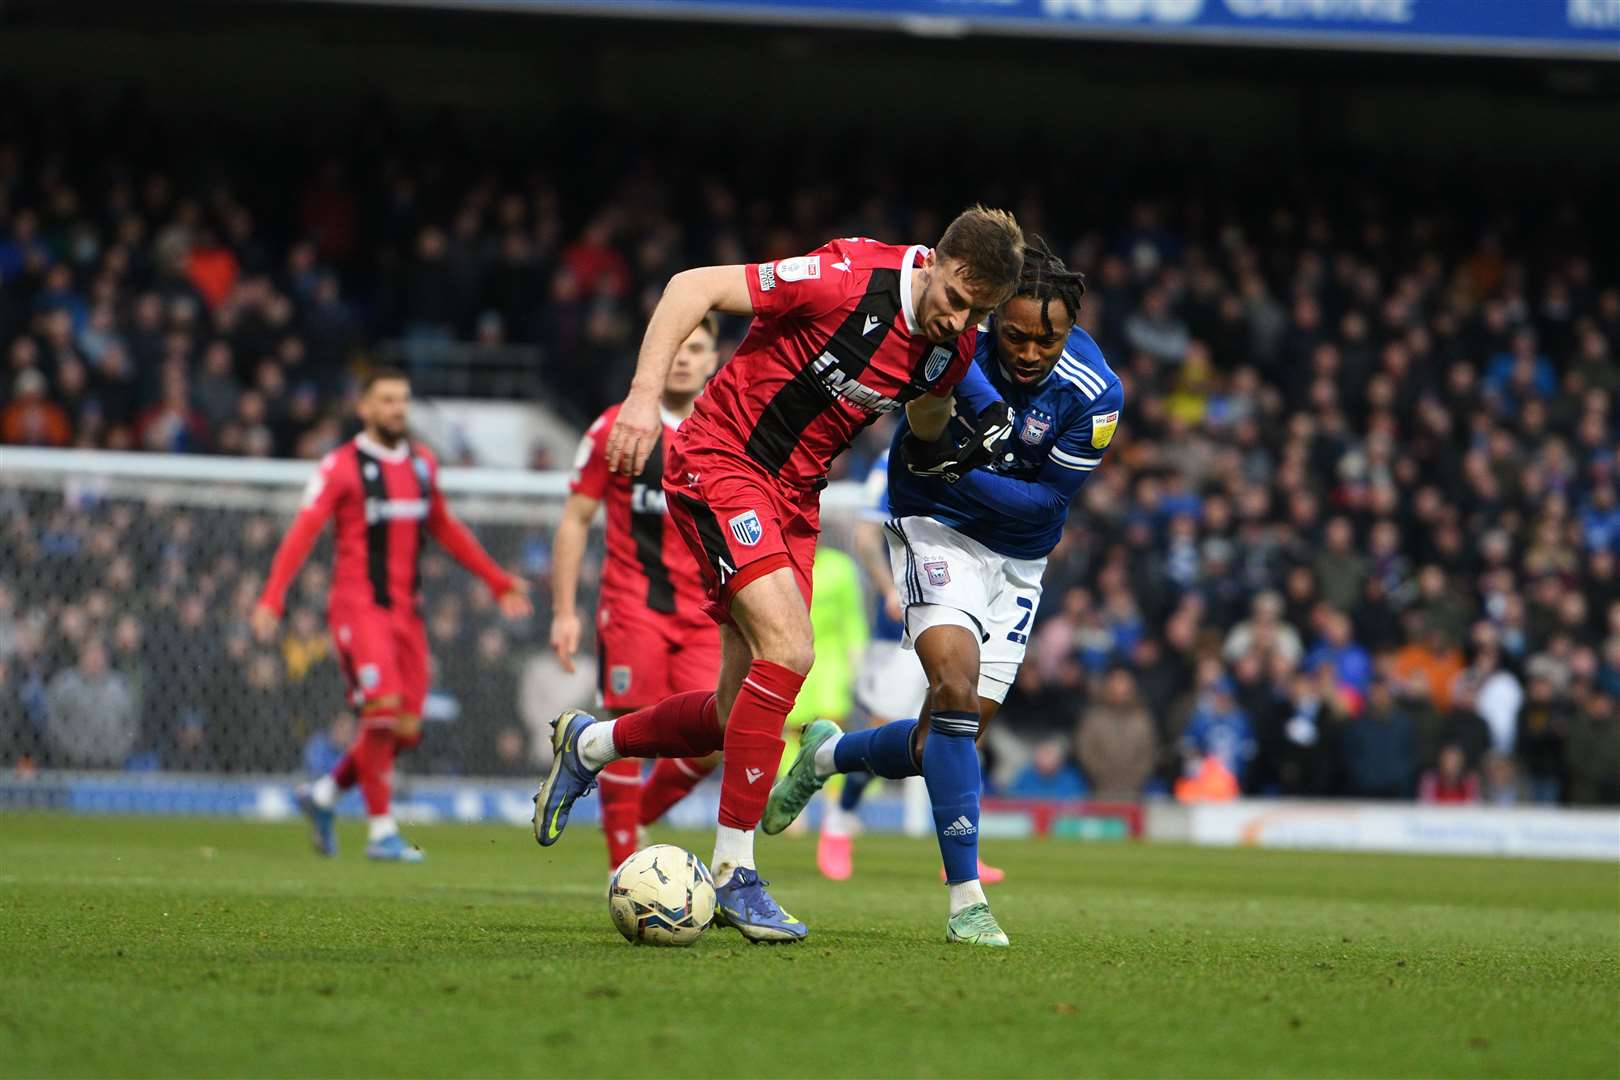 Conor Masterson fends off a challenge for the Gills Picture: Barry Goodwin